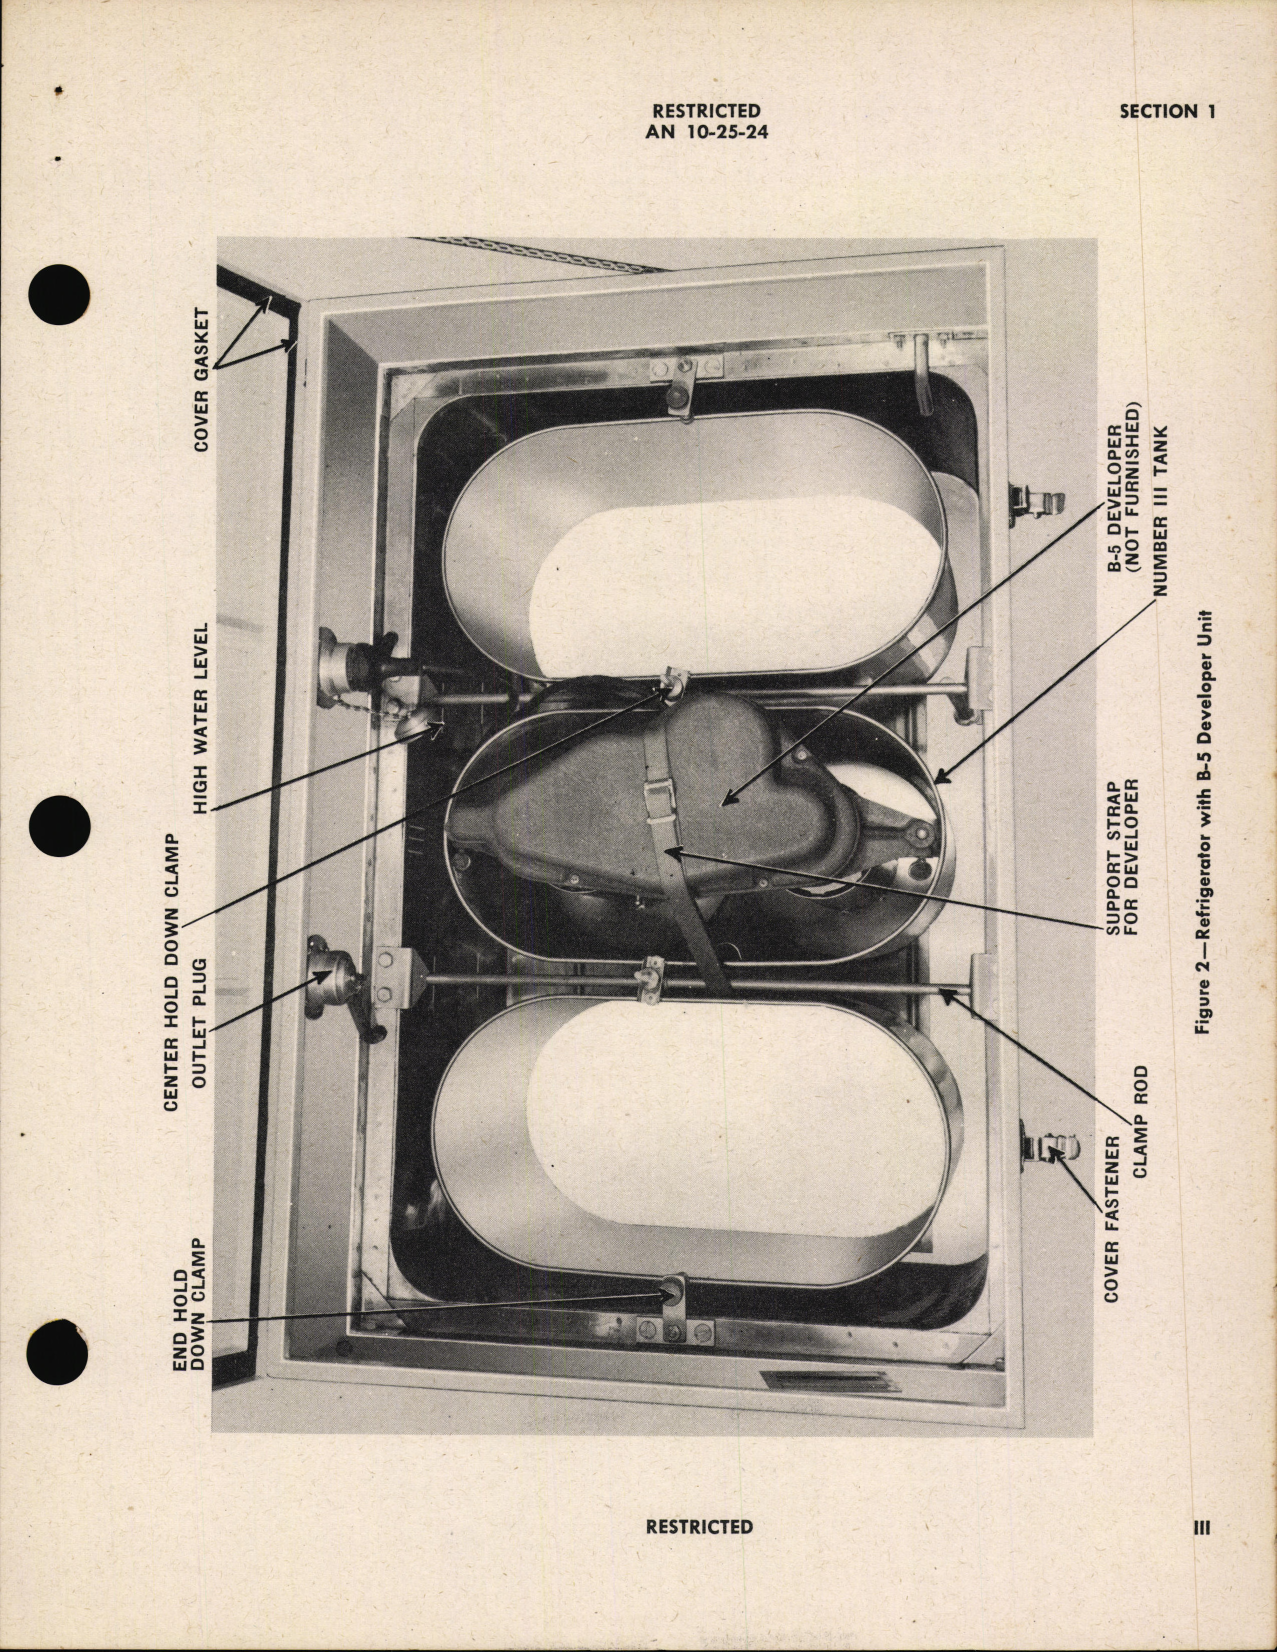 Sample page 5 from AirCorps Library document: Handbook of Instructions with Parts Catalog for Photographic Film-Processing Refrigerator